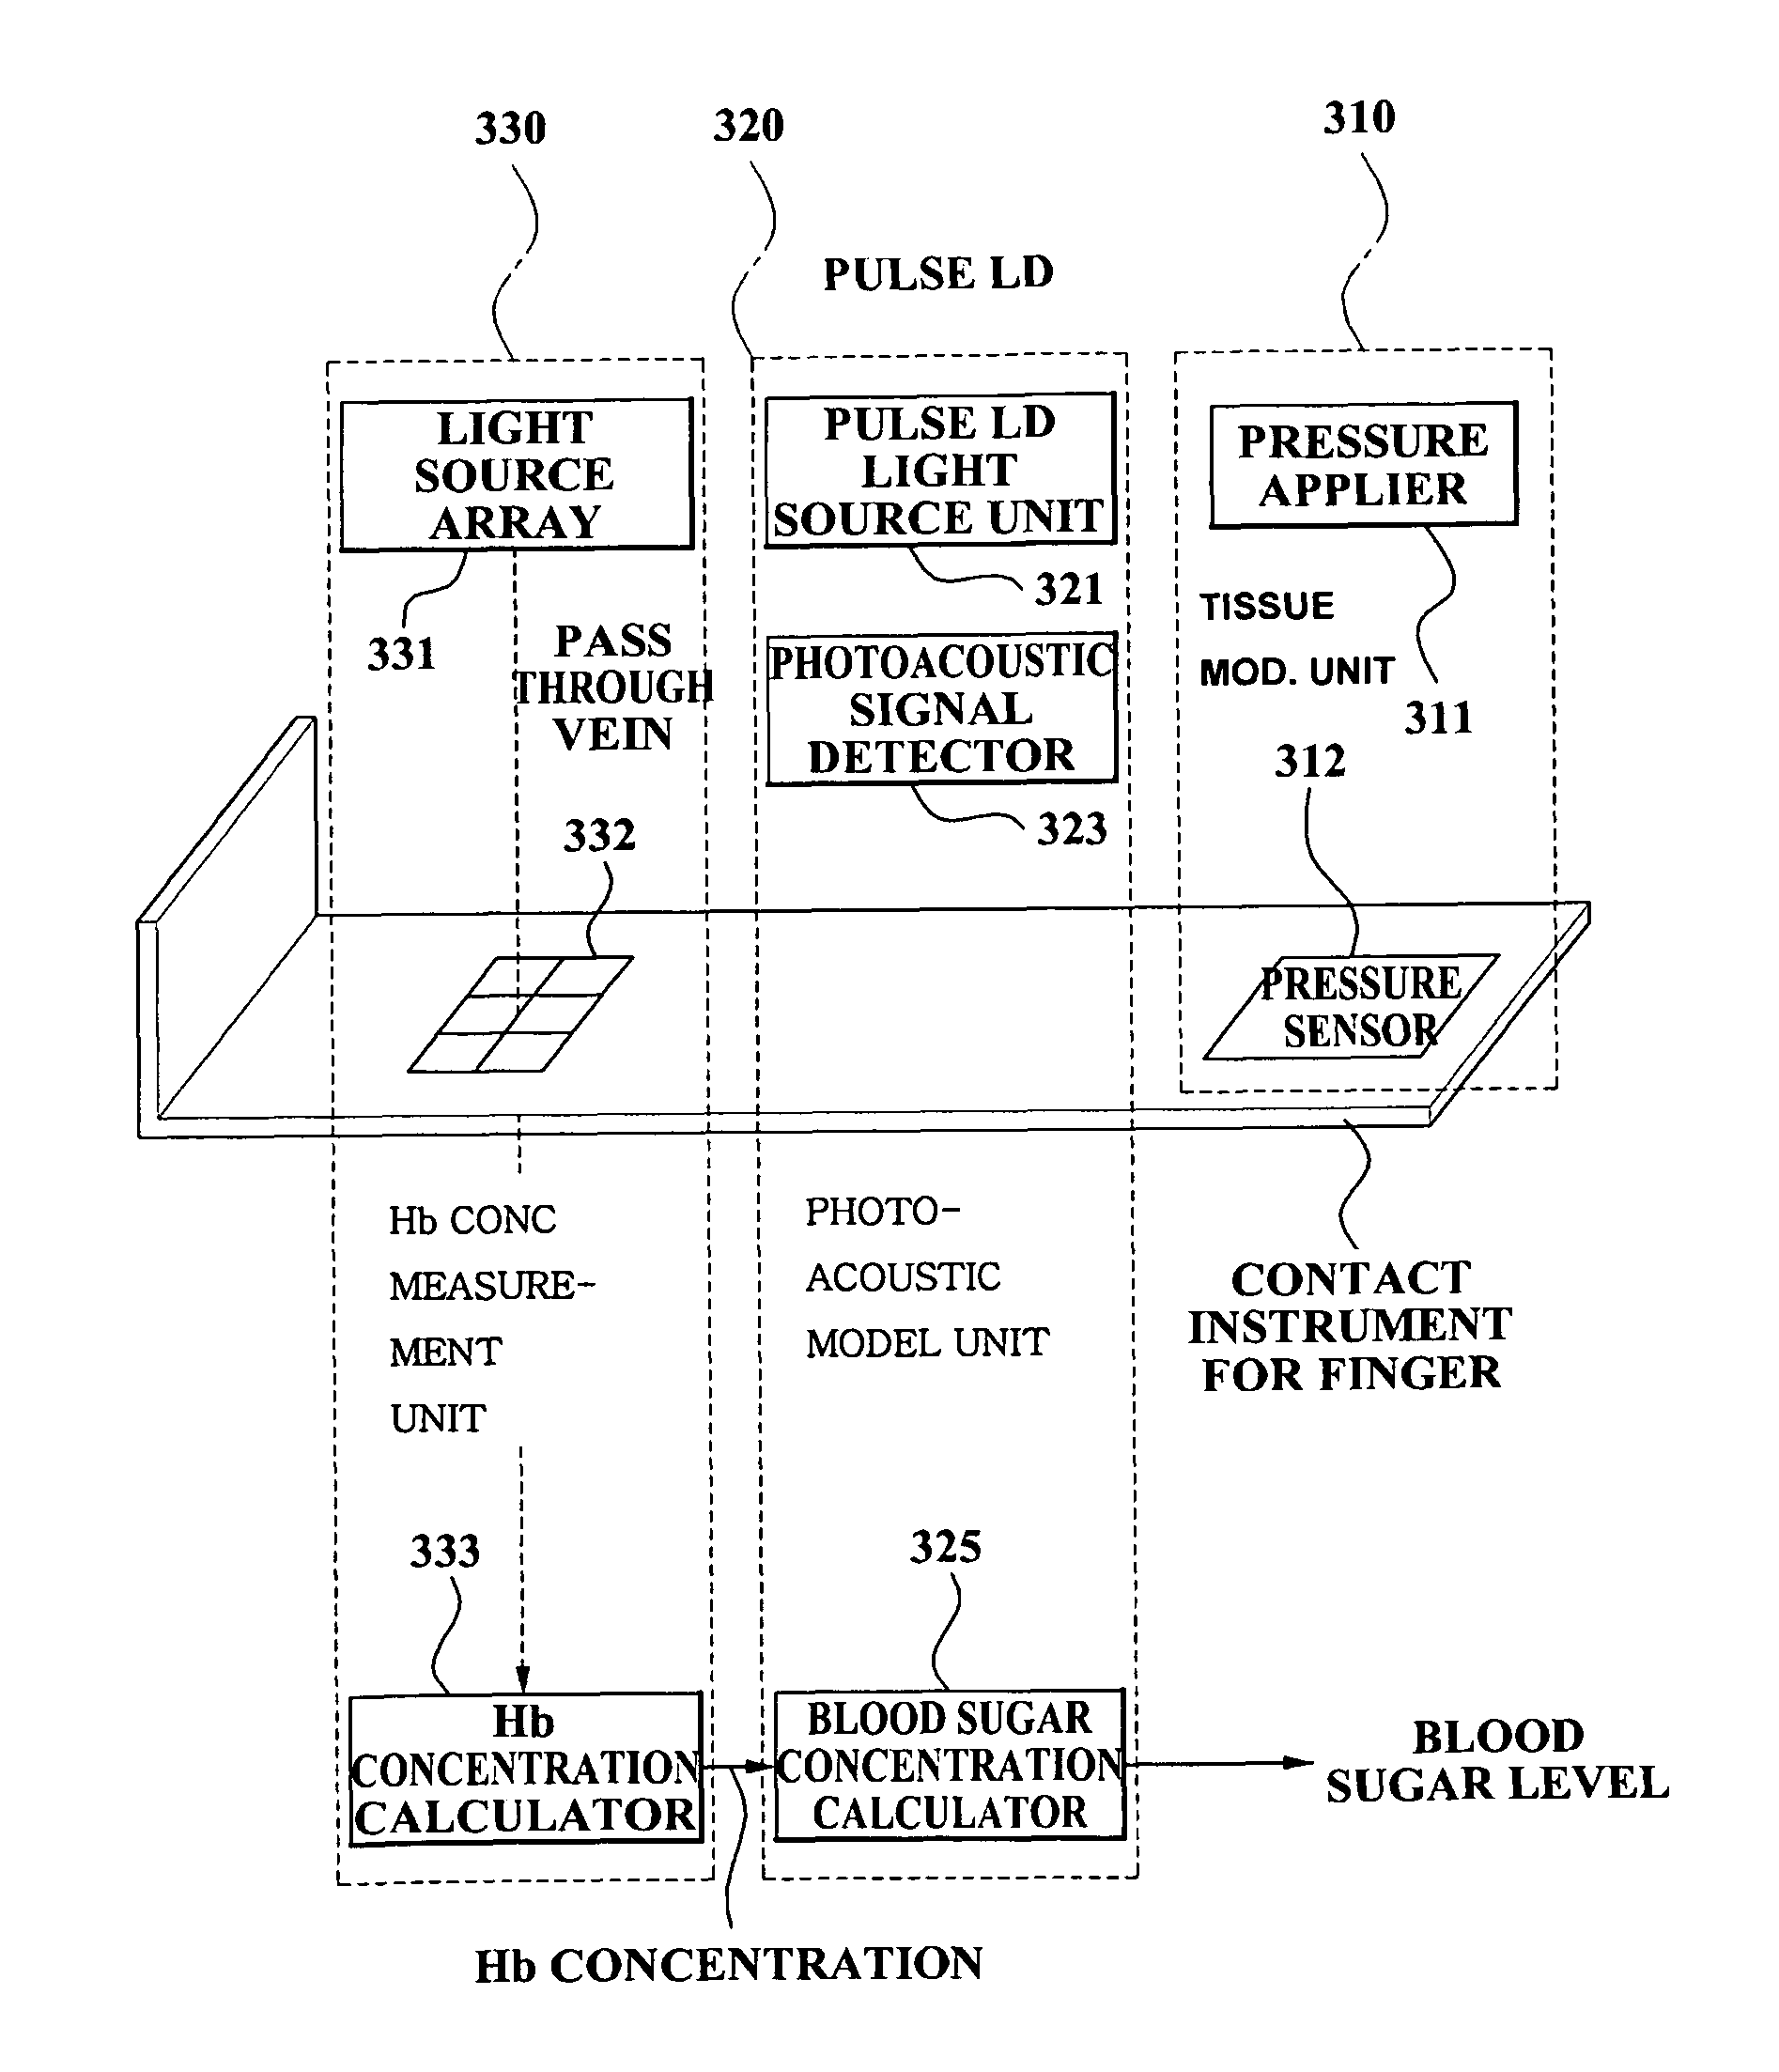 Noninvasive apparatus and method for measuring blood sugar concentration